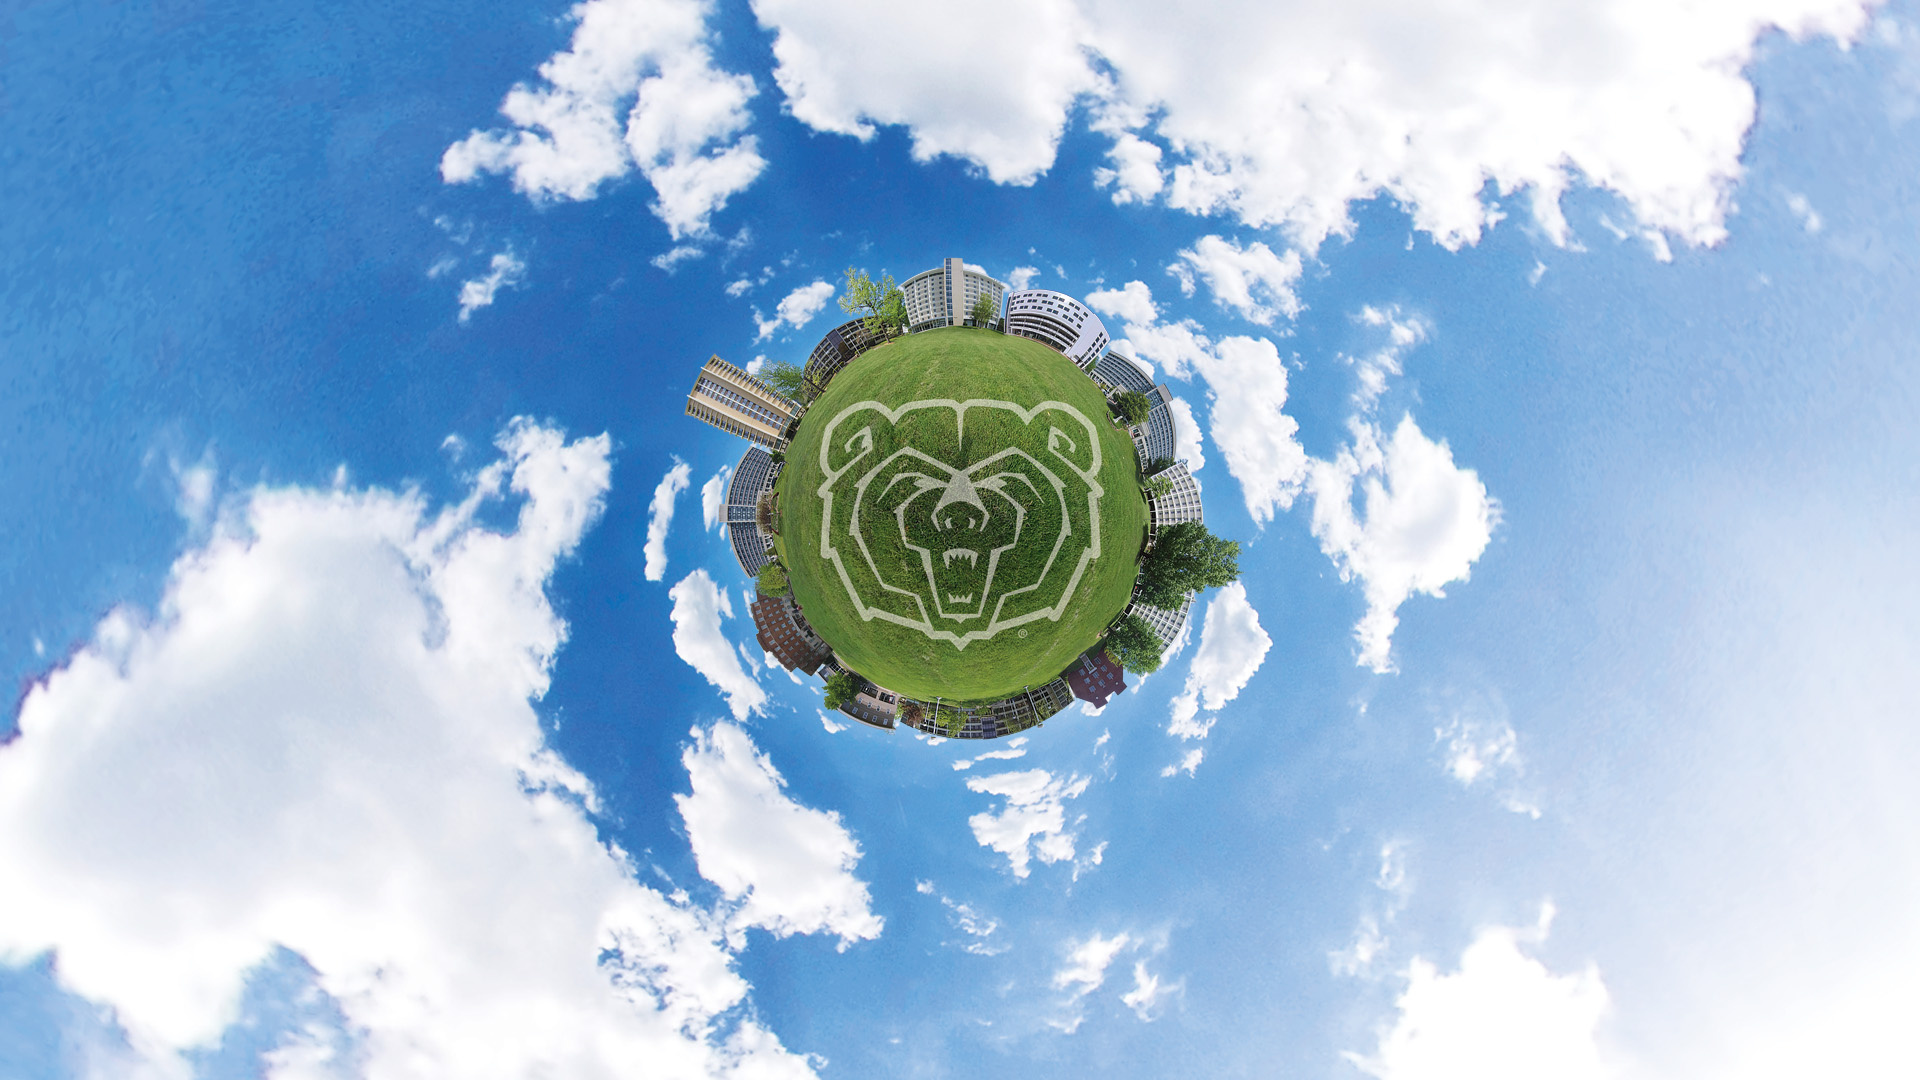 Photo collage of residence halls surrounding a tiny grass planet floating in a blue sky with clouds